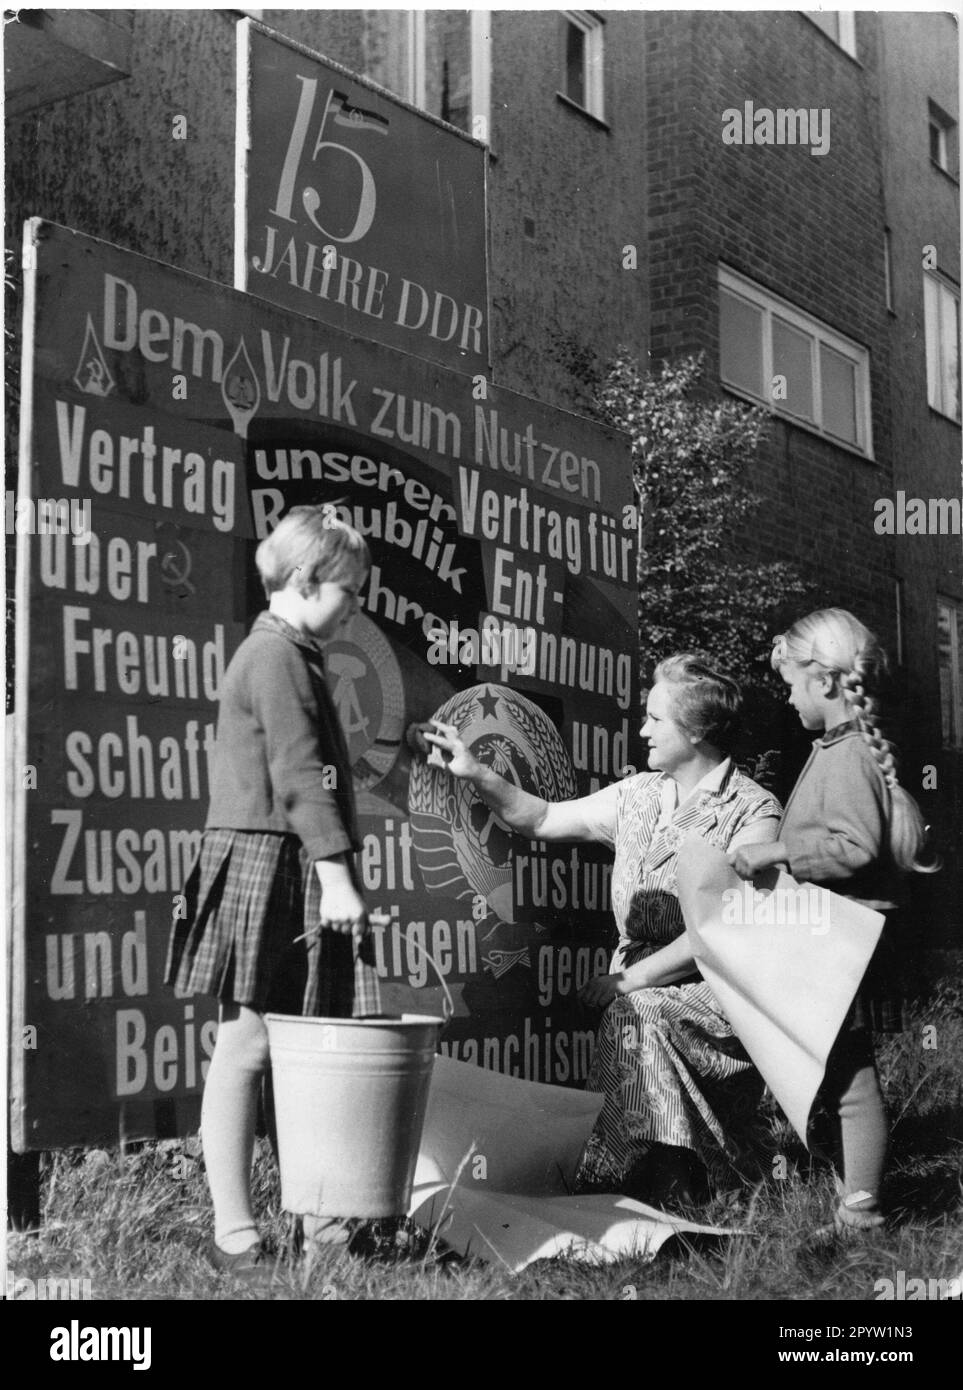 'Potsdam 1964 Preparations for Republic Day, a typical propaganda image, original caption: ''The Republic Day festive cleaning also begins in the residential areas. At Paul-Neumann-Strasse 29 in Babelsberg. Comrade Martin putting the finishing touches on a display stand. Marlis and Erwin were helpfully on hand.'' GDR. historical. Photo: MAZ/Manfred Haseloff, 1964 [automated translation]' Stock Photo